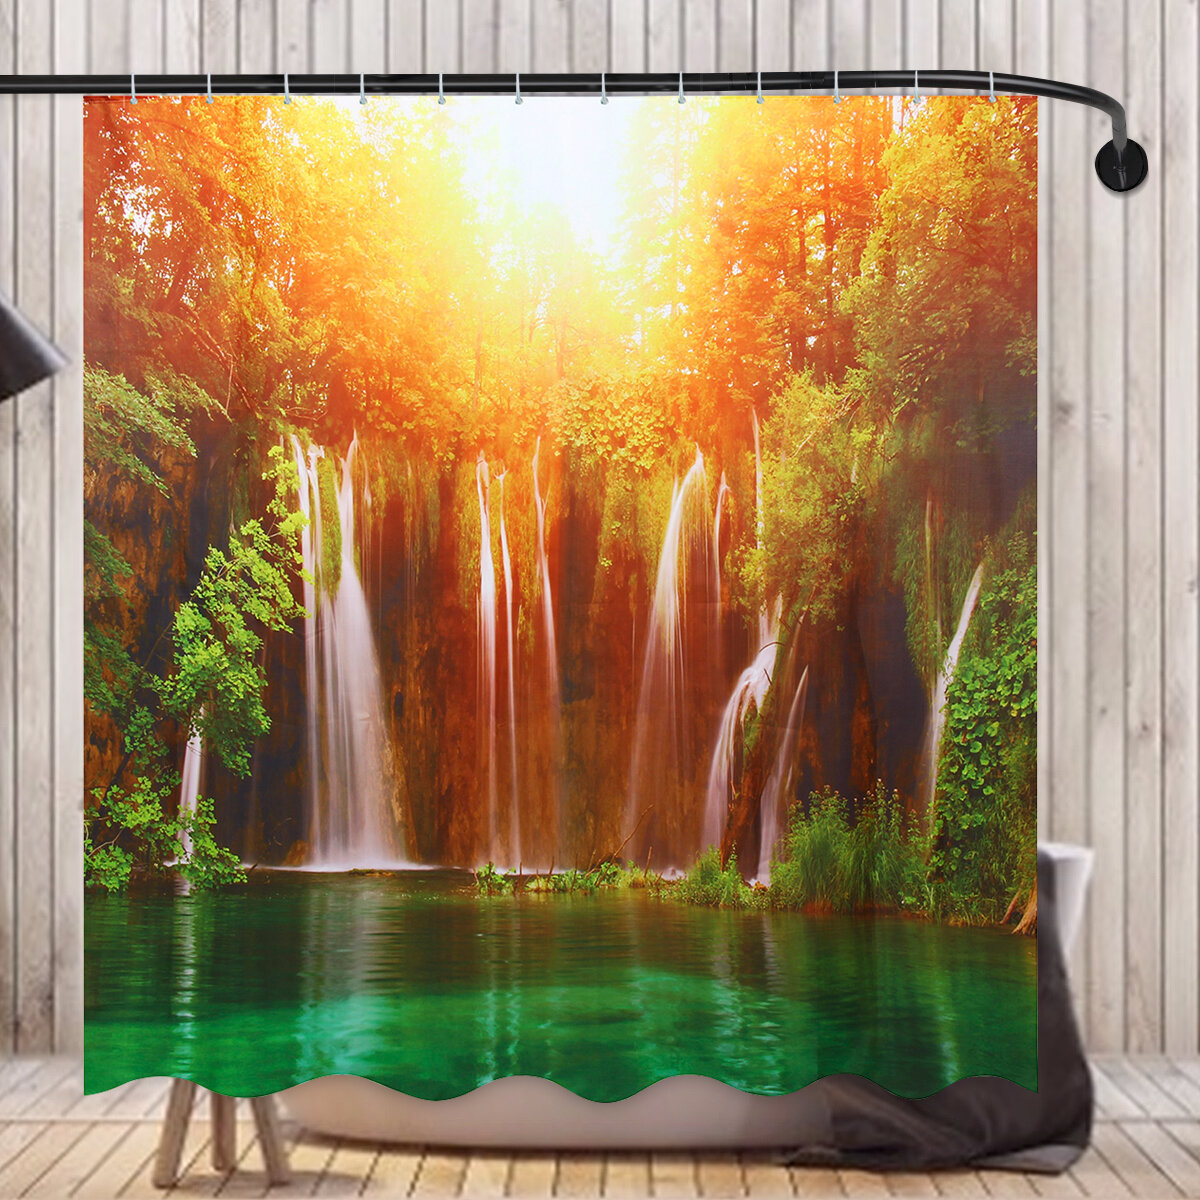 180x180CM 3D Waterfall Nature Scenery Shower Curtain Water-repellent Polyester Bathroom Curtain